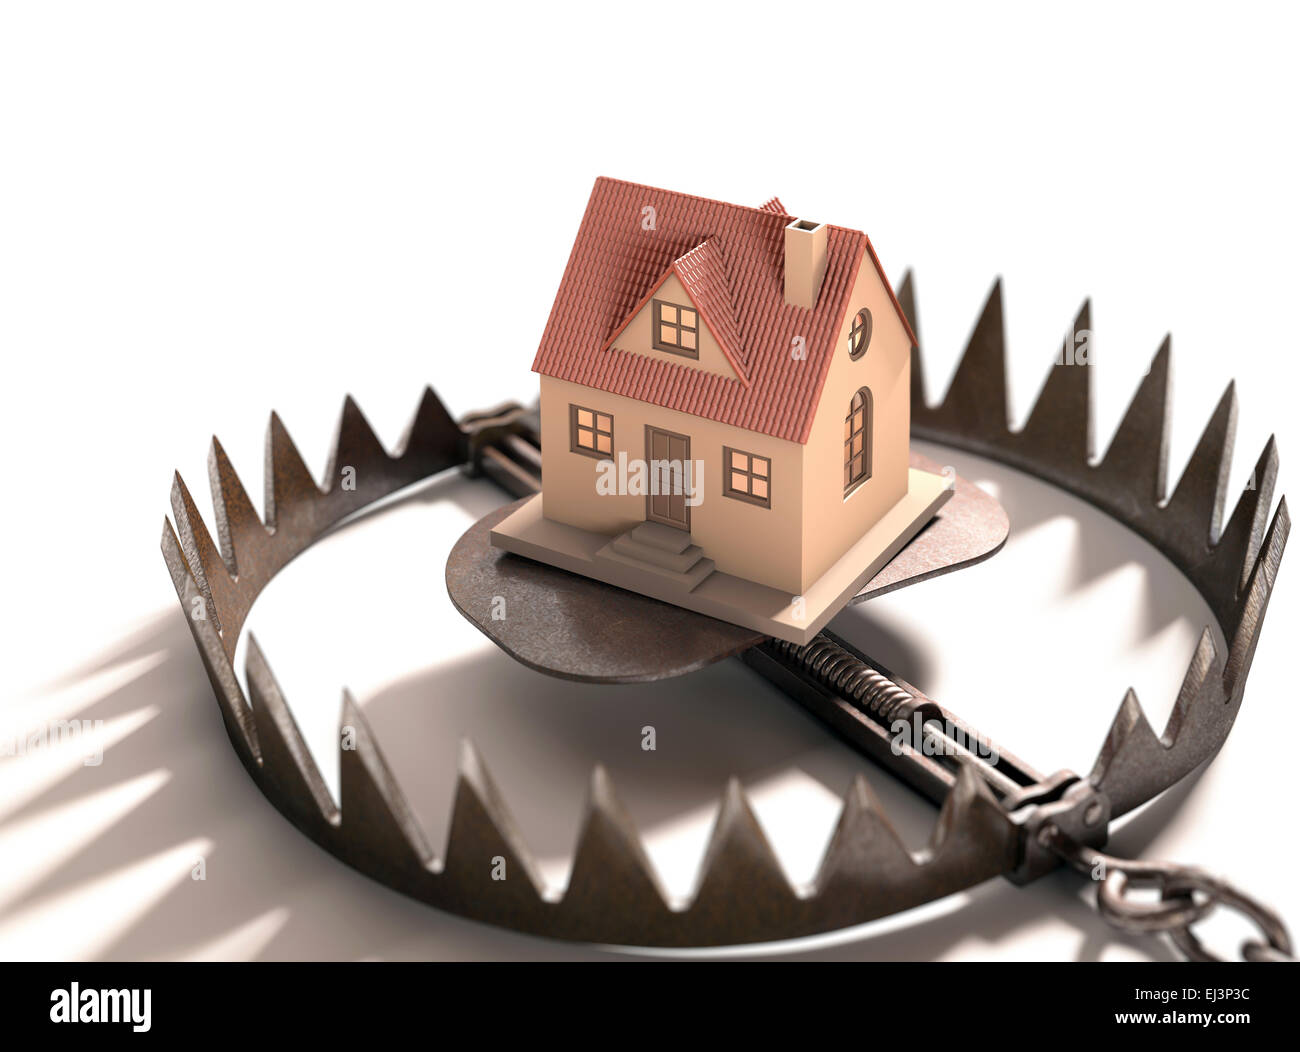 Animal trap with house, illustration Stock Photo